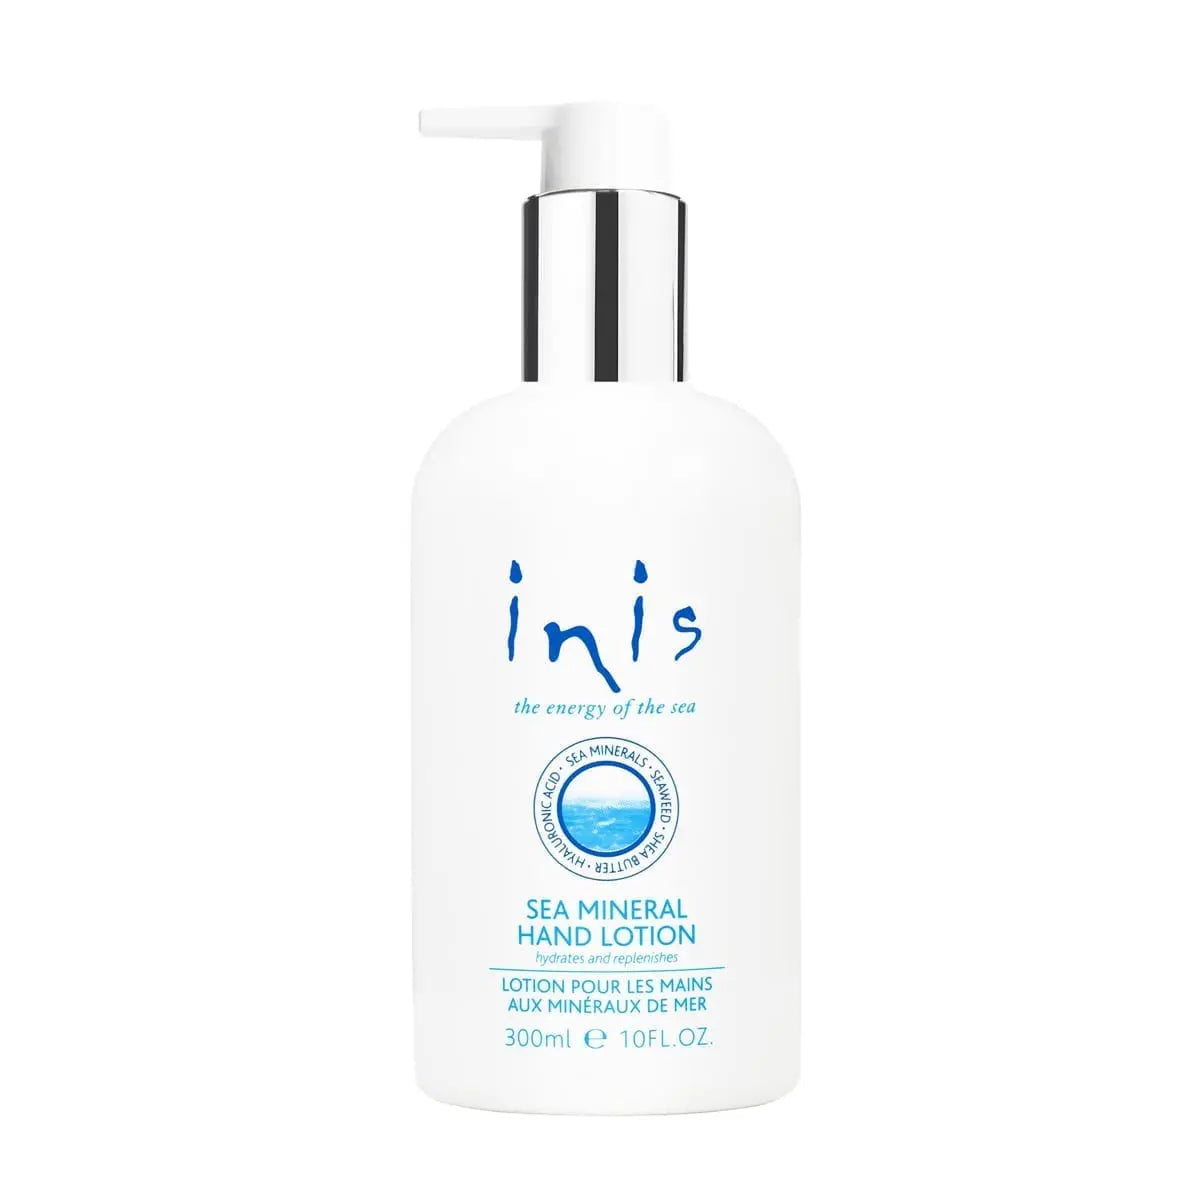 Inis Energy of the Sea - Hand Lotion 10 fl.oz.